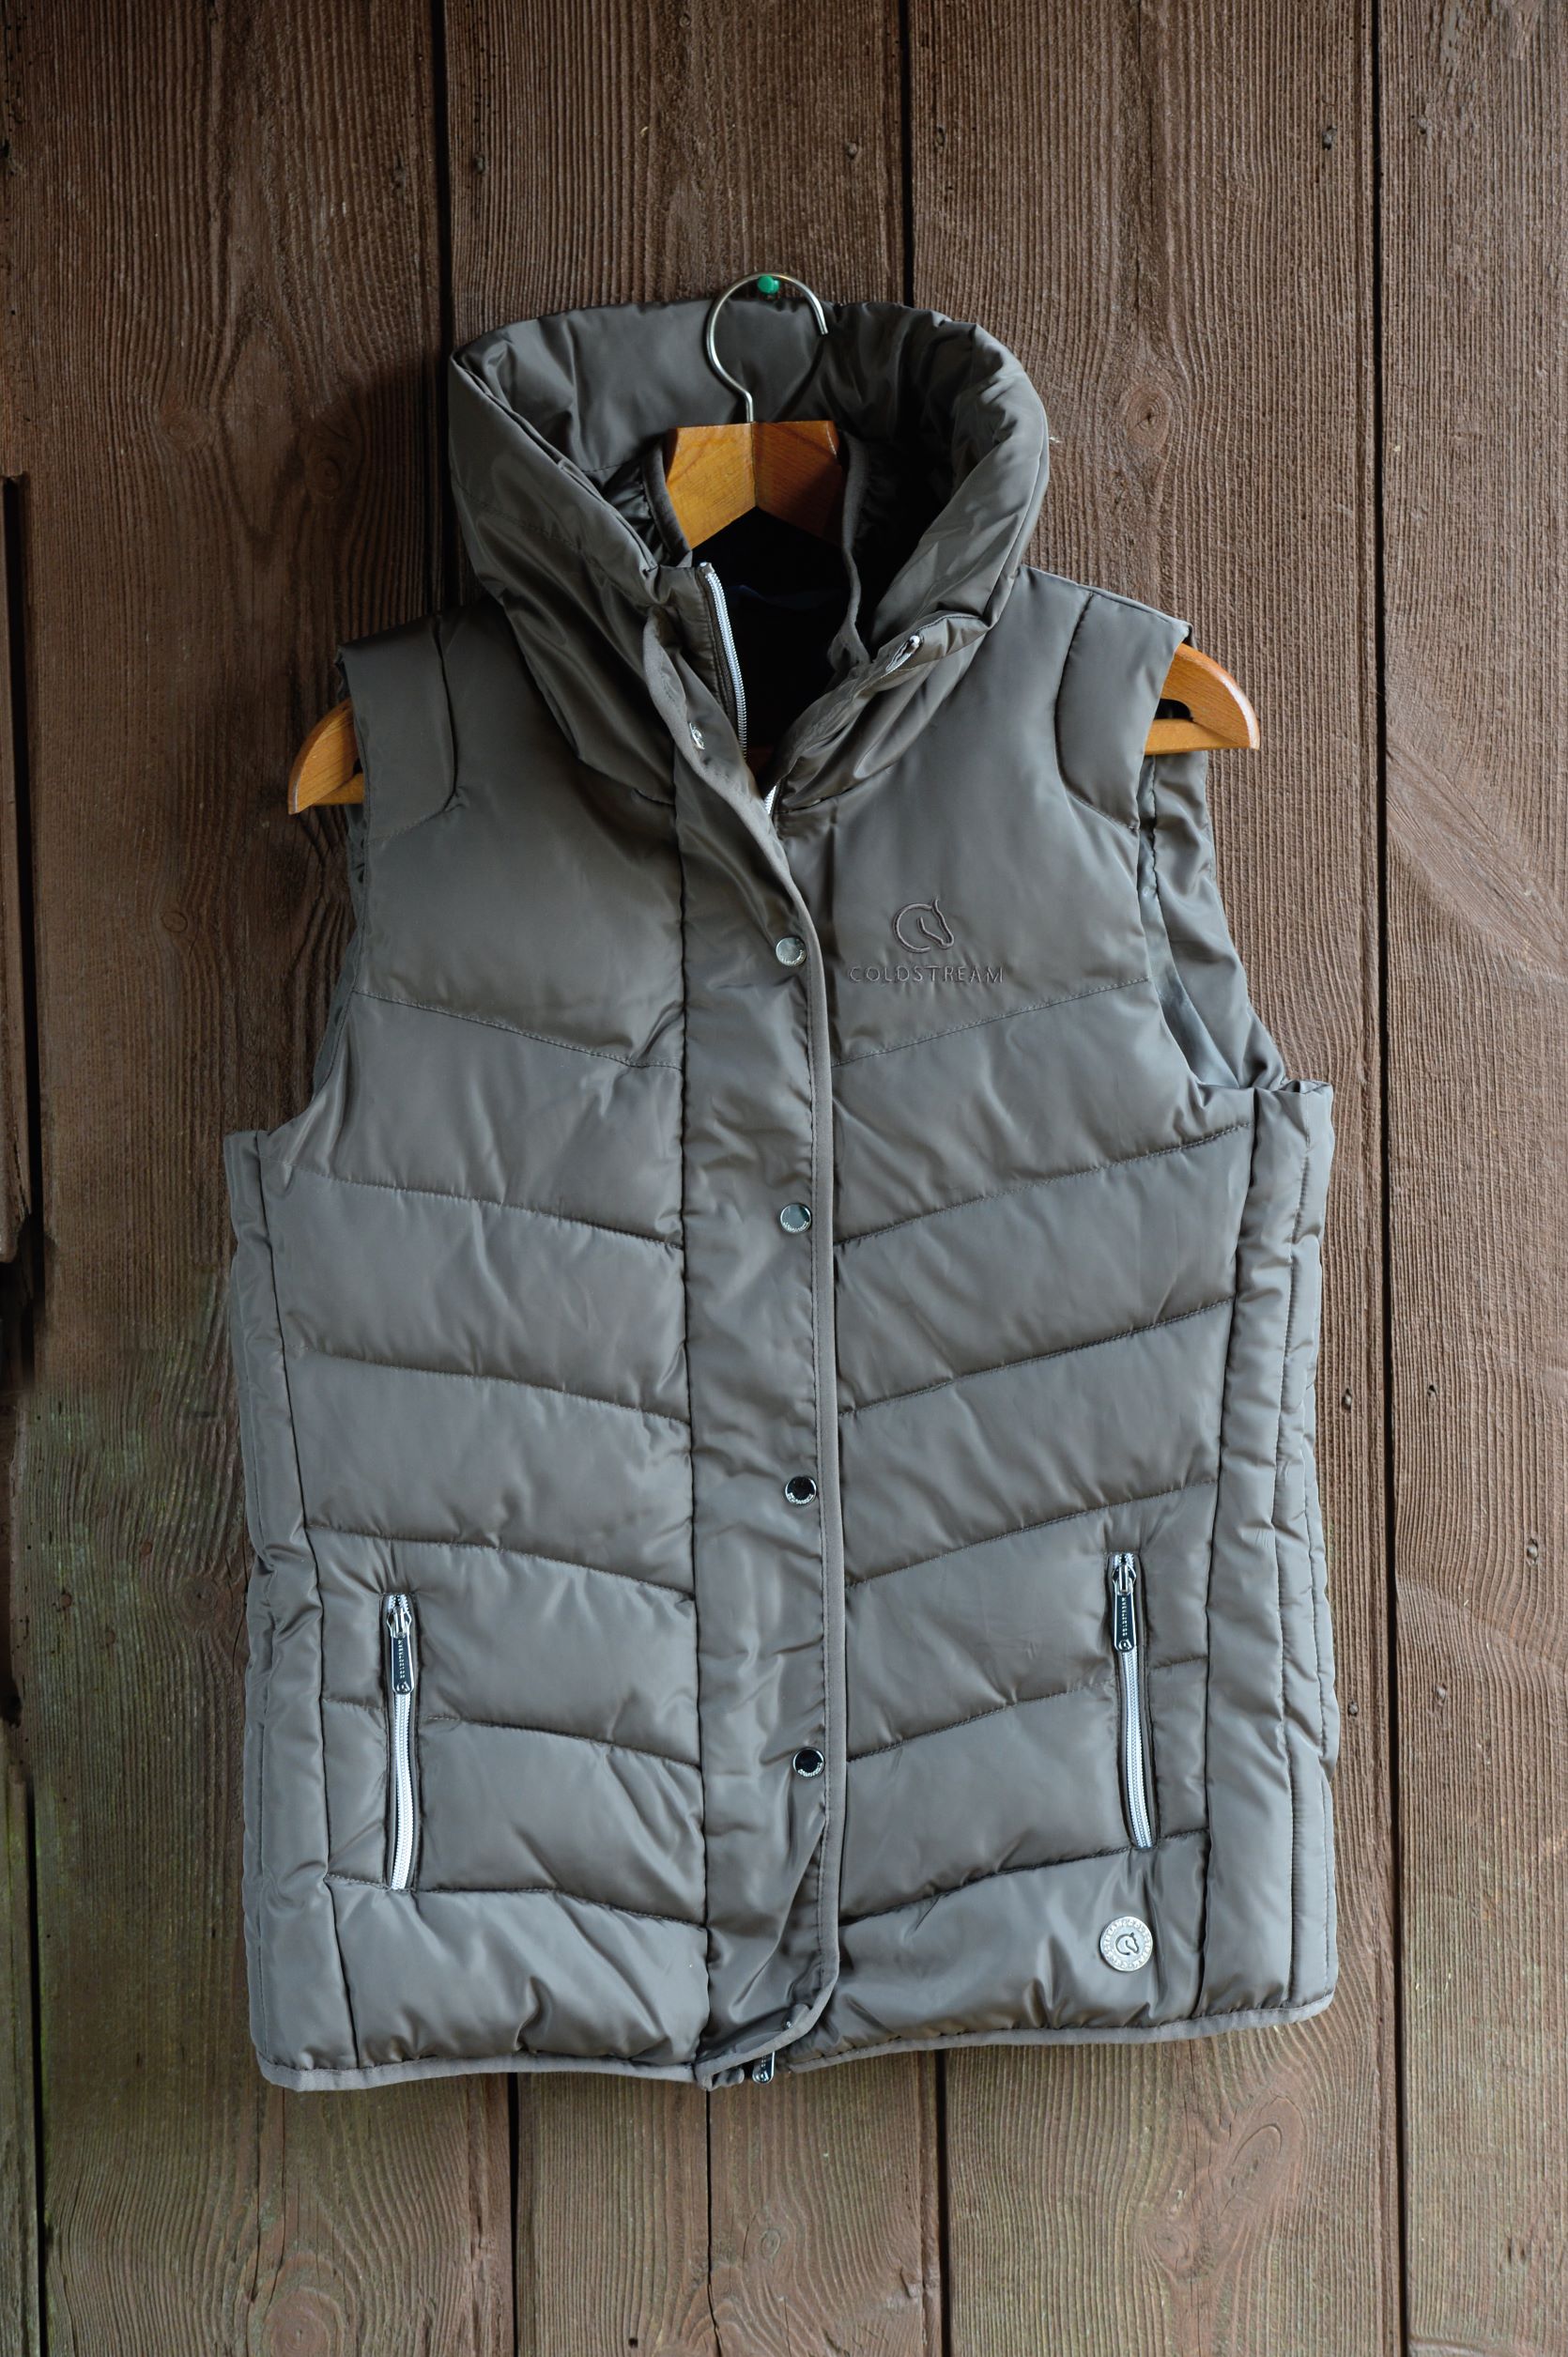 5 gilets tried and tested by horse owners and riders - Your Horse